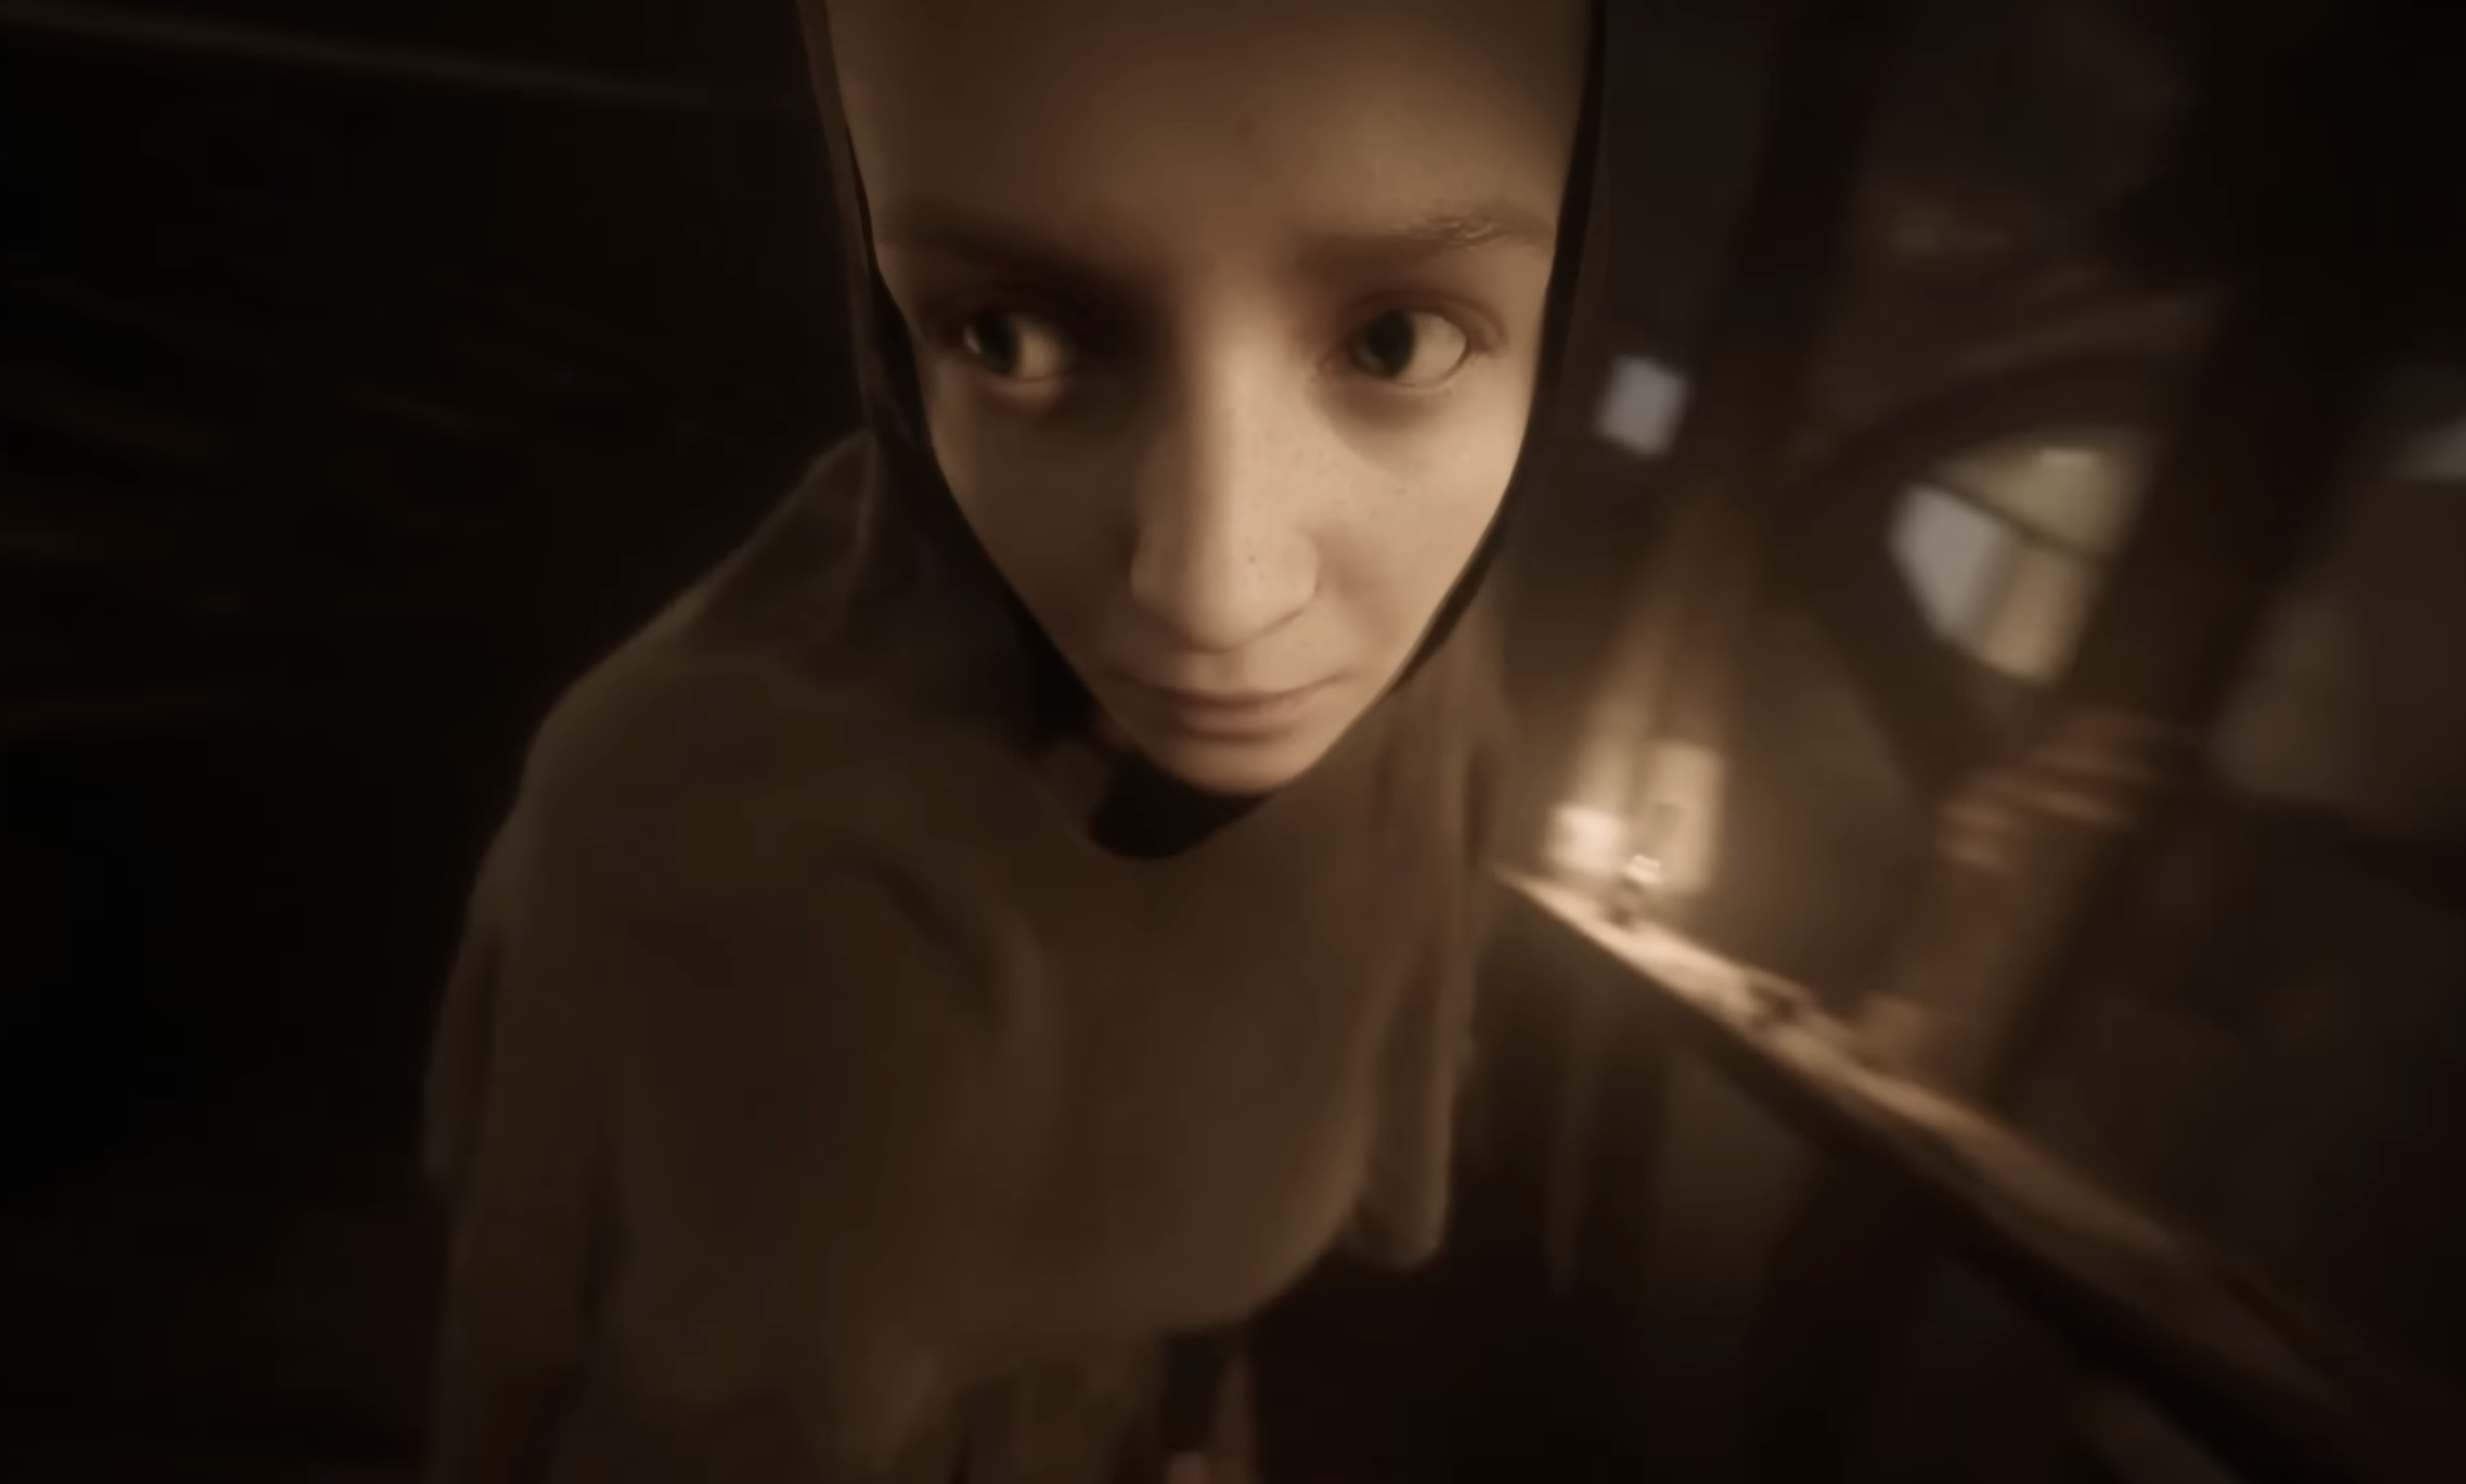 In Indika, the game’s creators position the camera like a Snorricam on the face of its titular nun